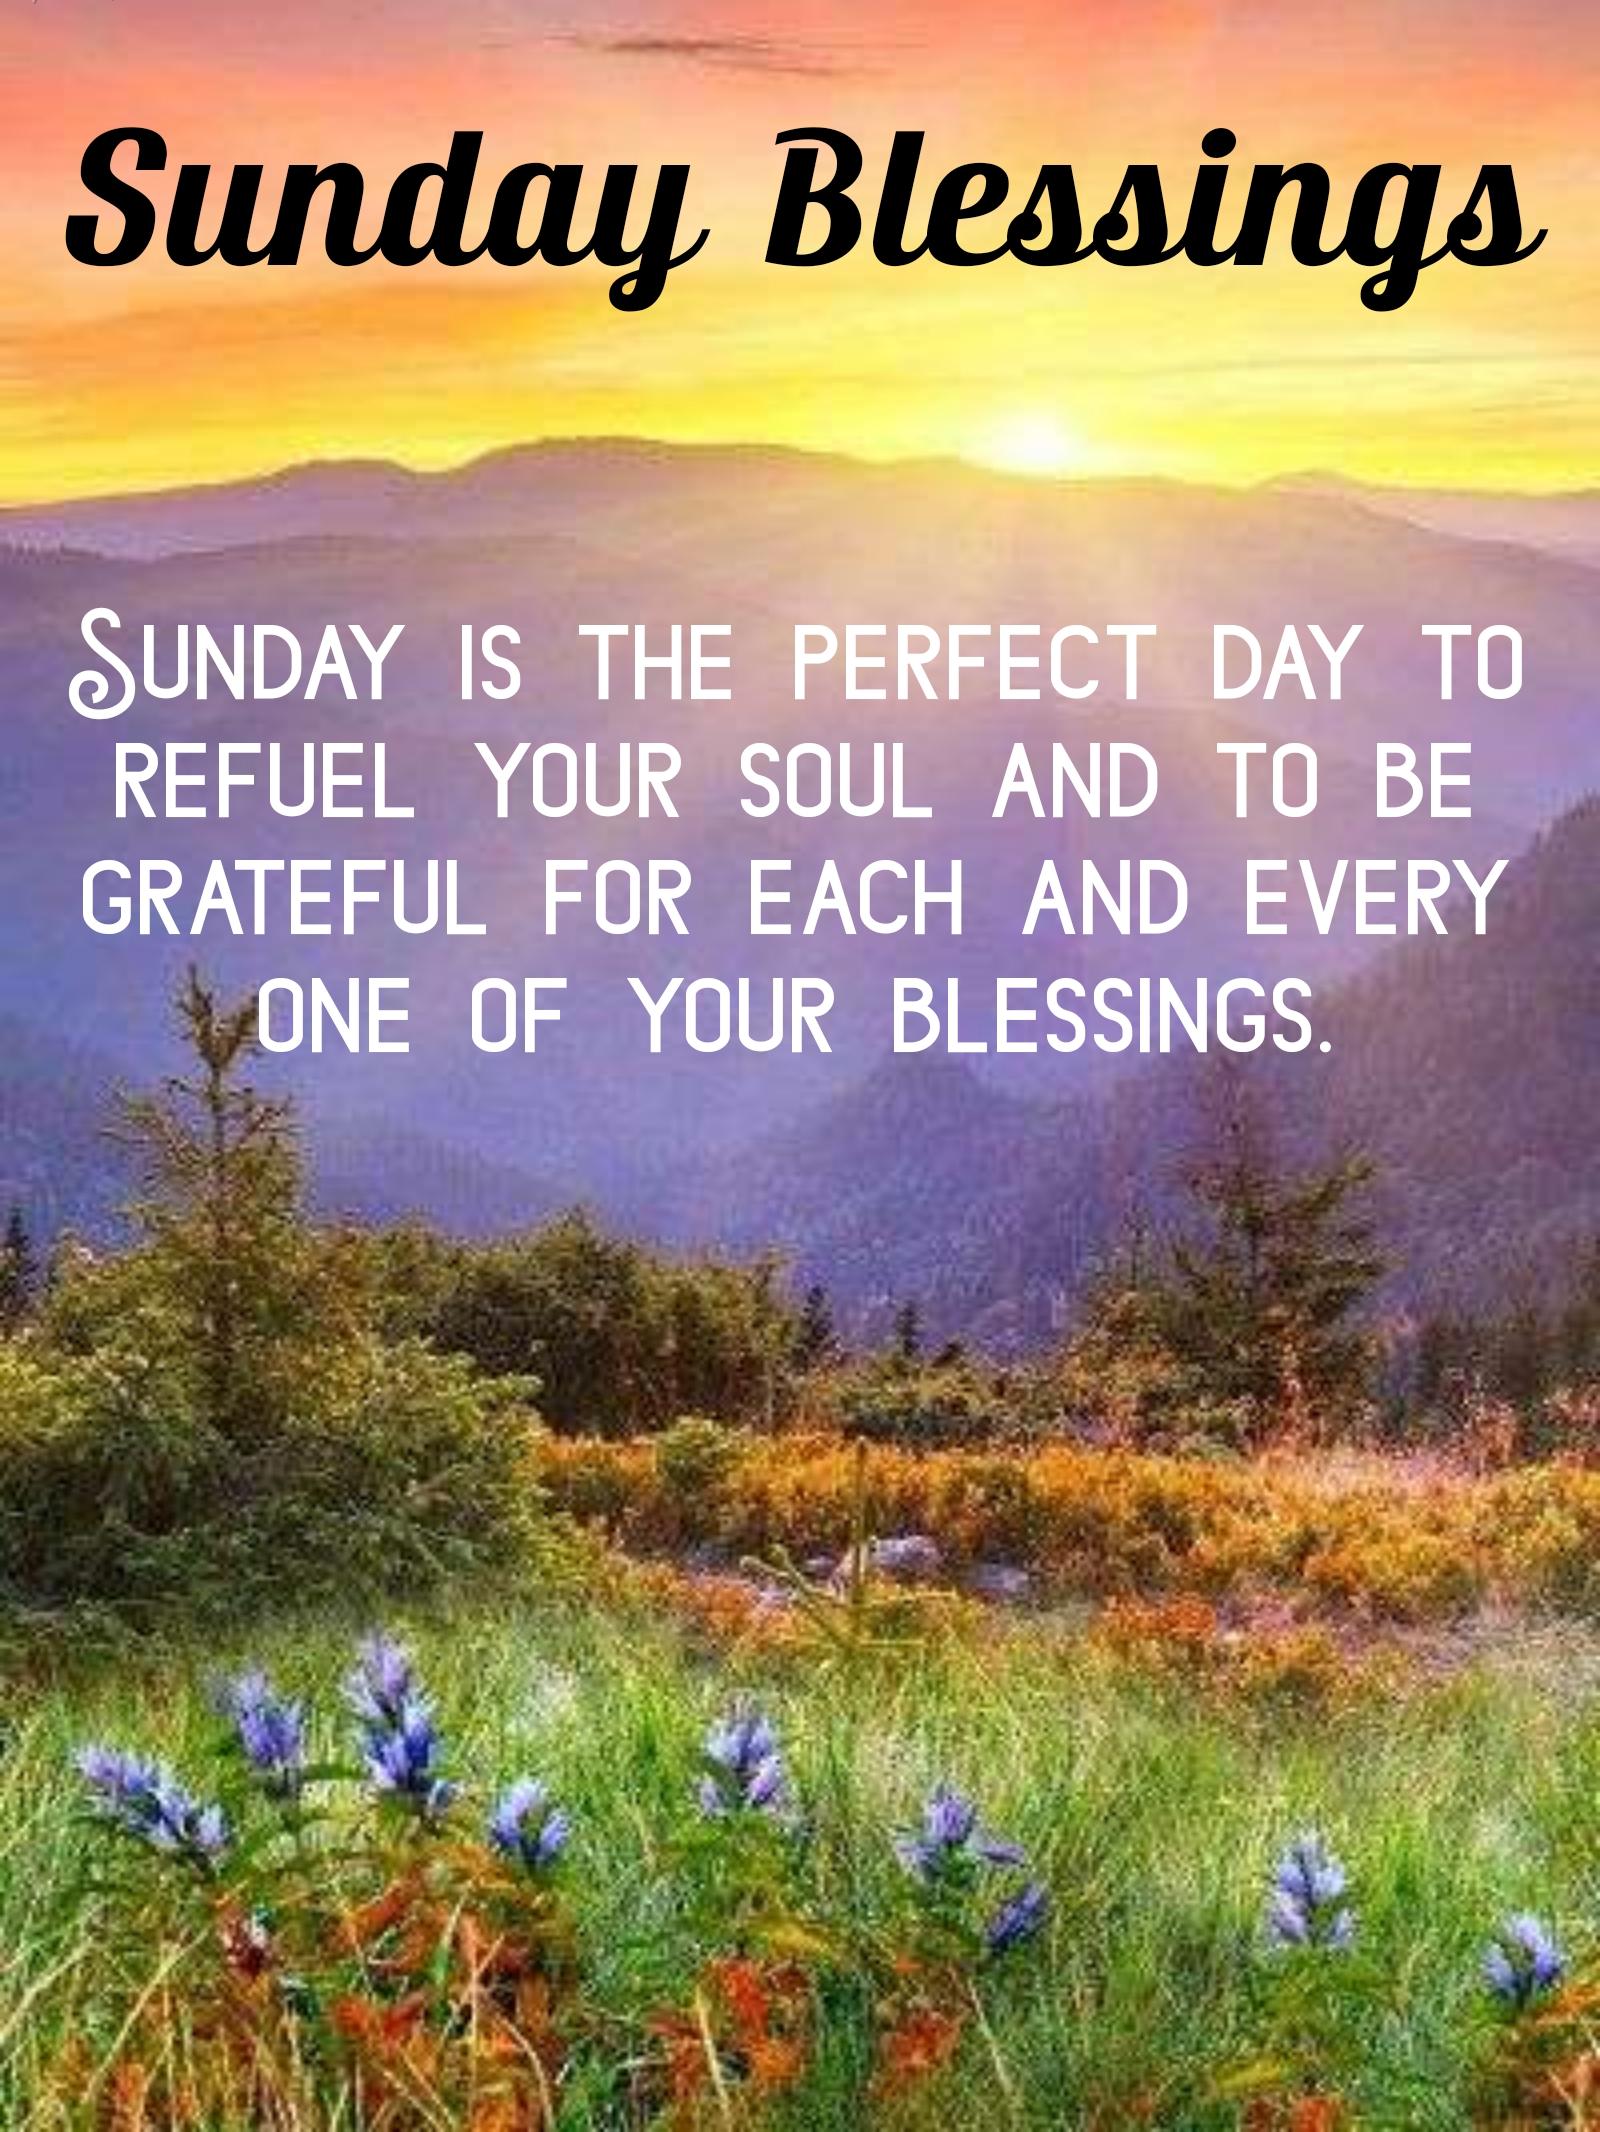 Sunday is the perfect day to refuel your soul and to be grateful